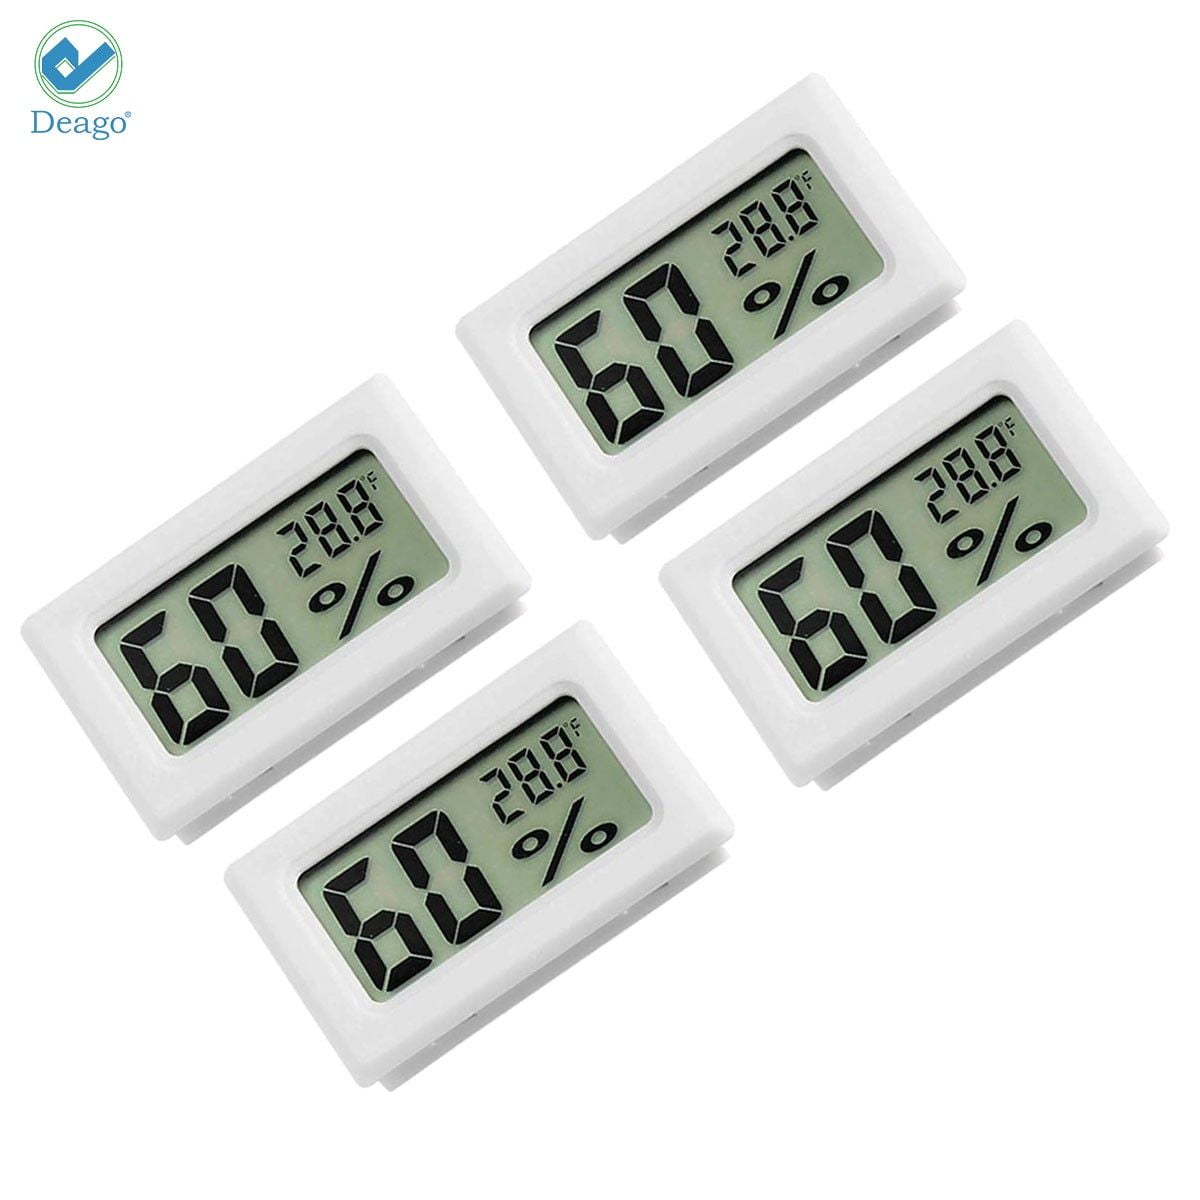 Elcoho 4 Pack Mini Hygrometer Thermometer LCD Display Thermometer Hygrometer Digital Electronic 